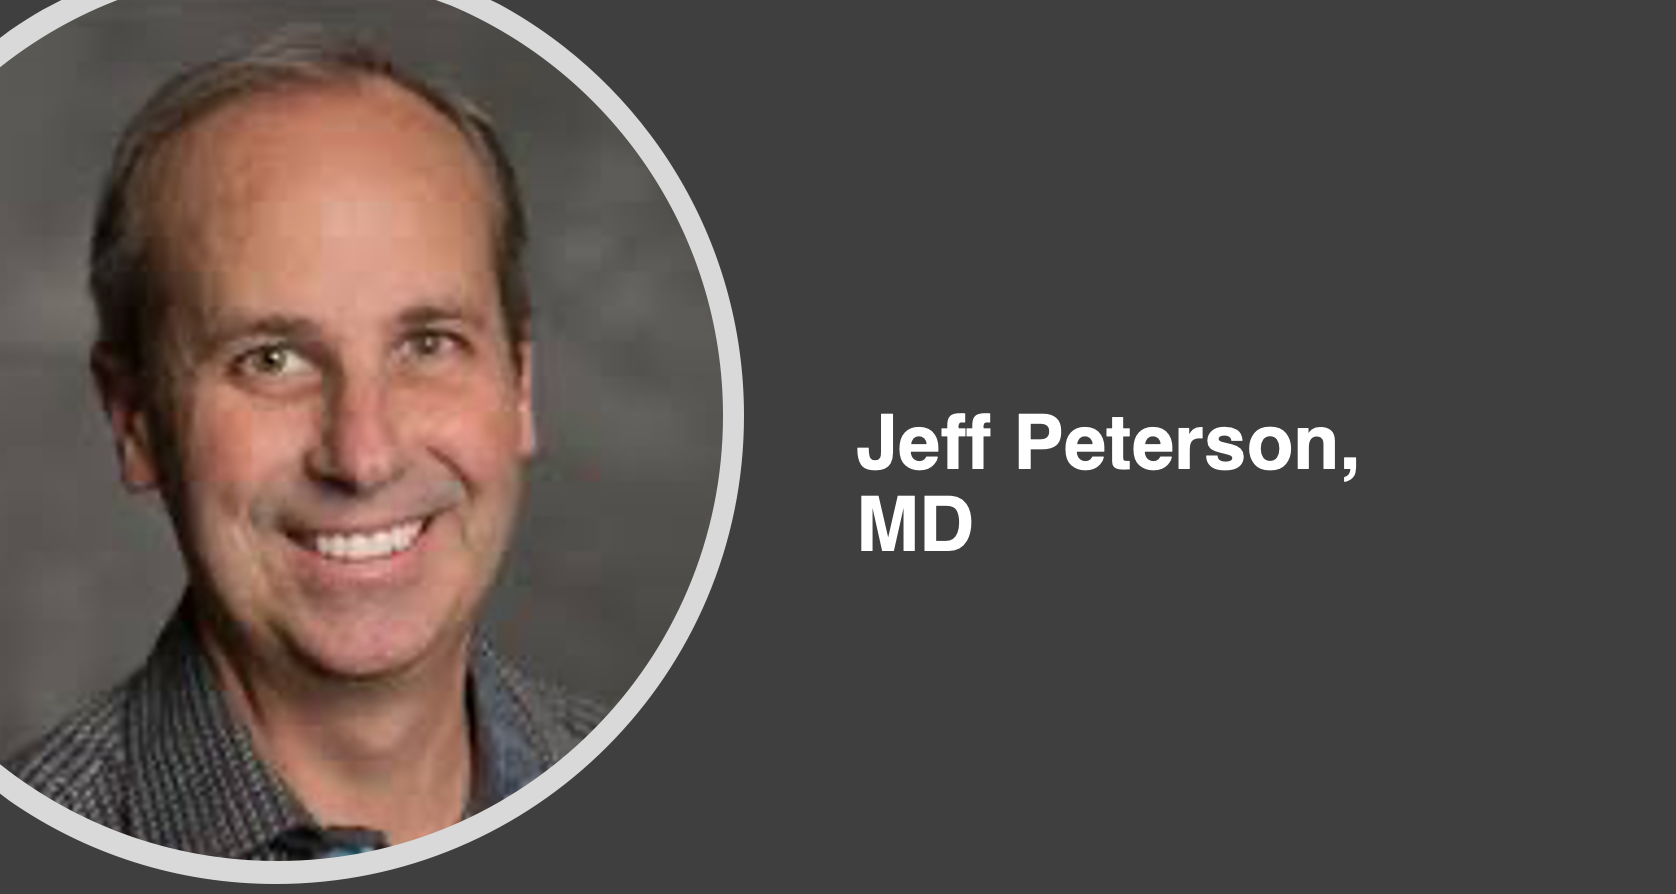 Jeff Peterson, MD: FDA Announces Priority Review of Pegloticase Plus Methotrexate for Gout Treatment